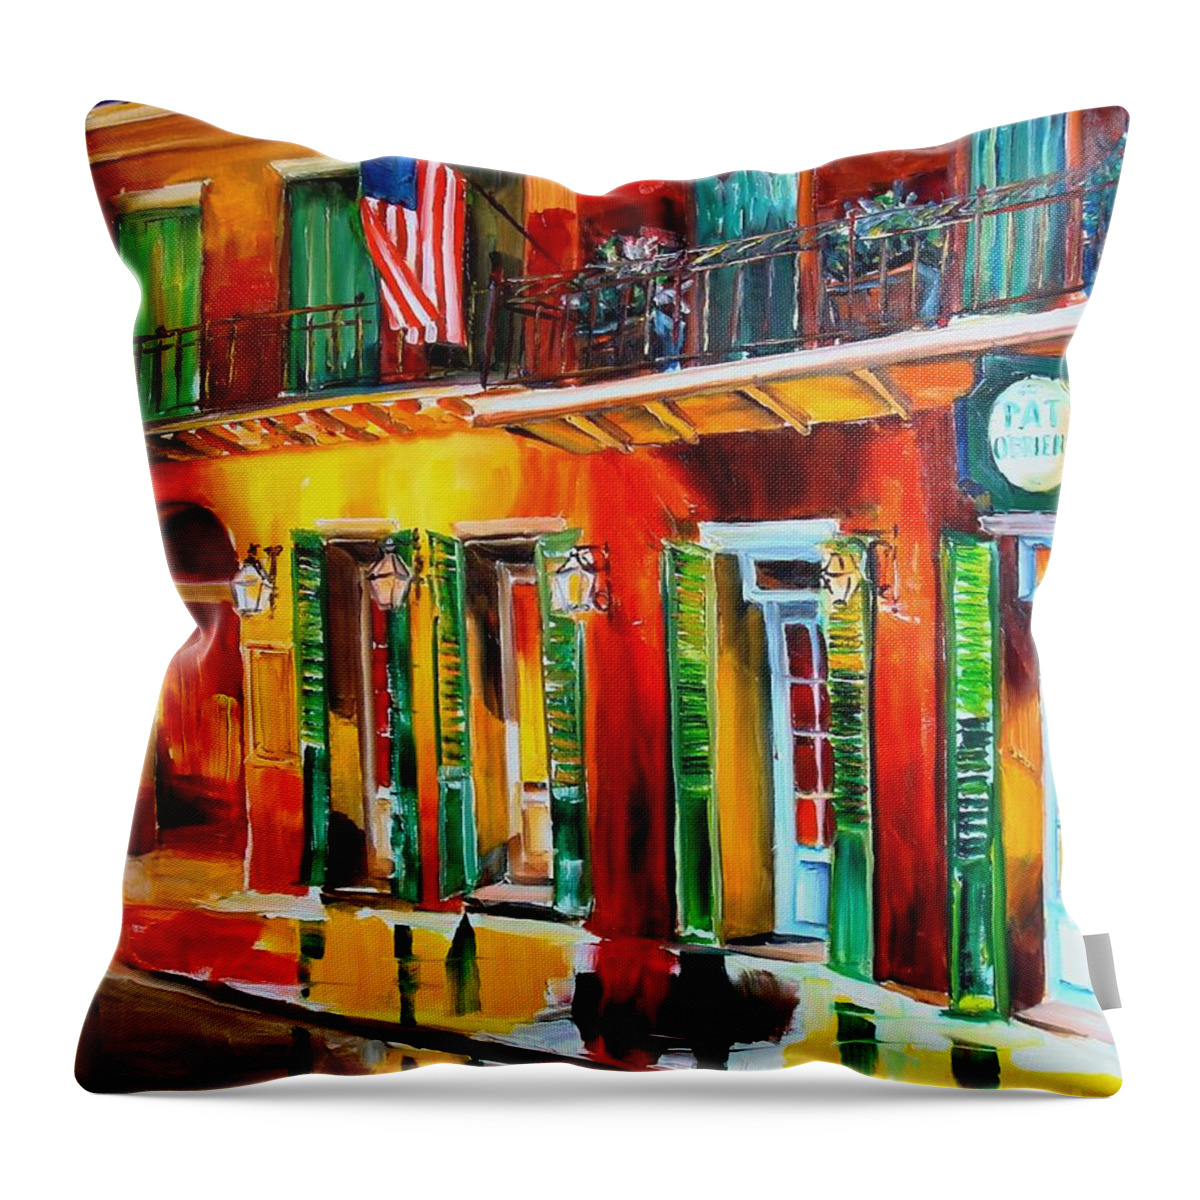 New Orleans Throw Pillow featuring the painting Outside Pat O Briens Bar by Diane Millsap